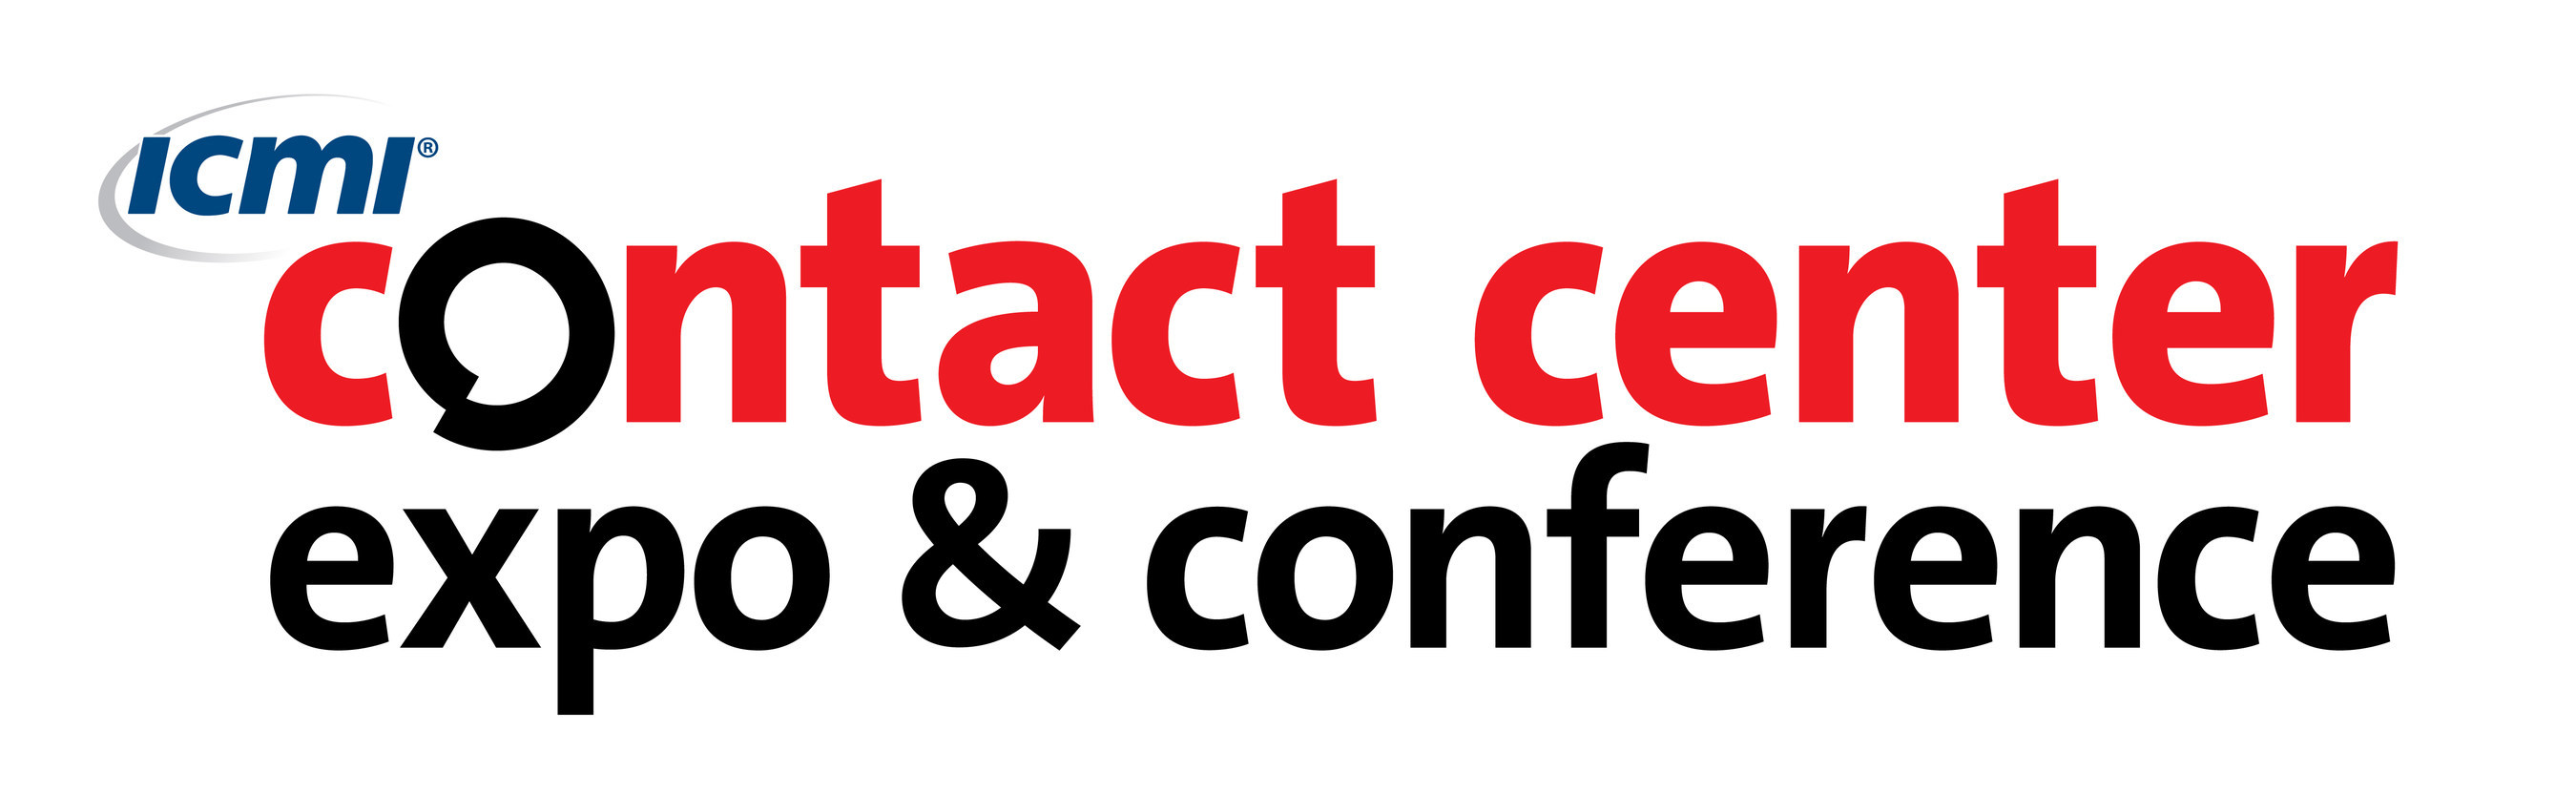 ICMI Contact Center Expo & Conference Enhances Offerings with the